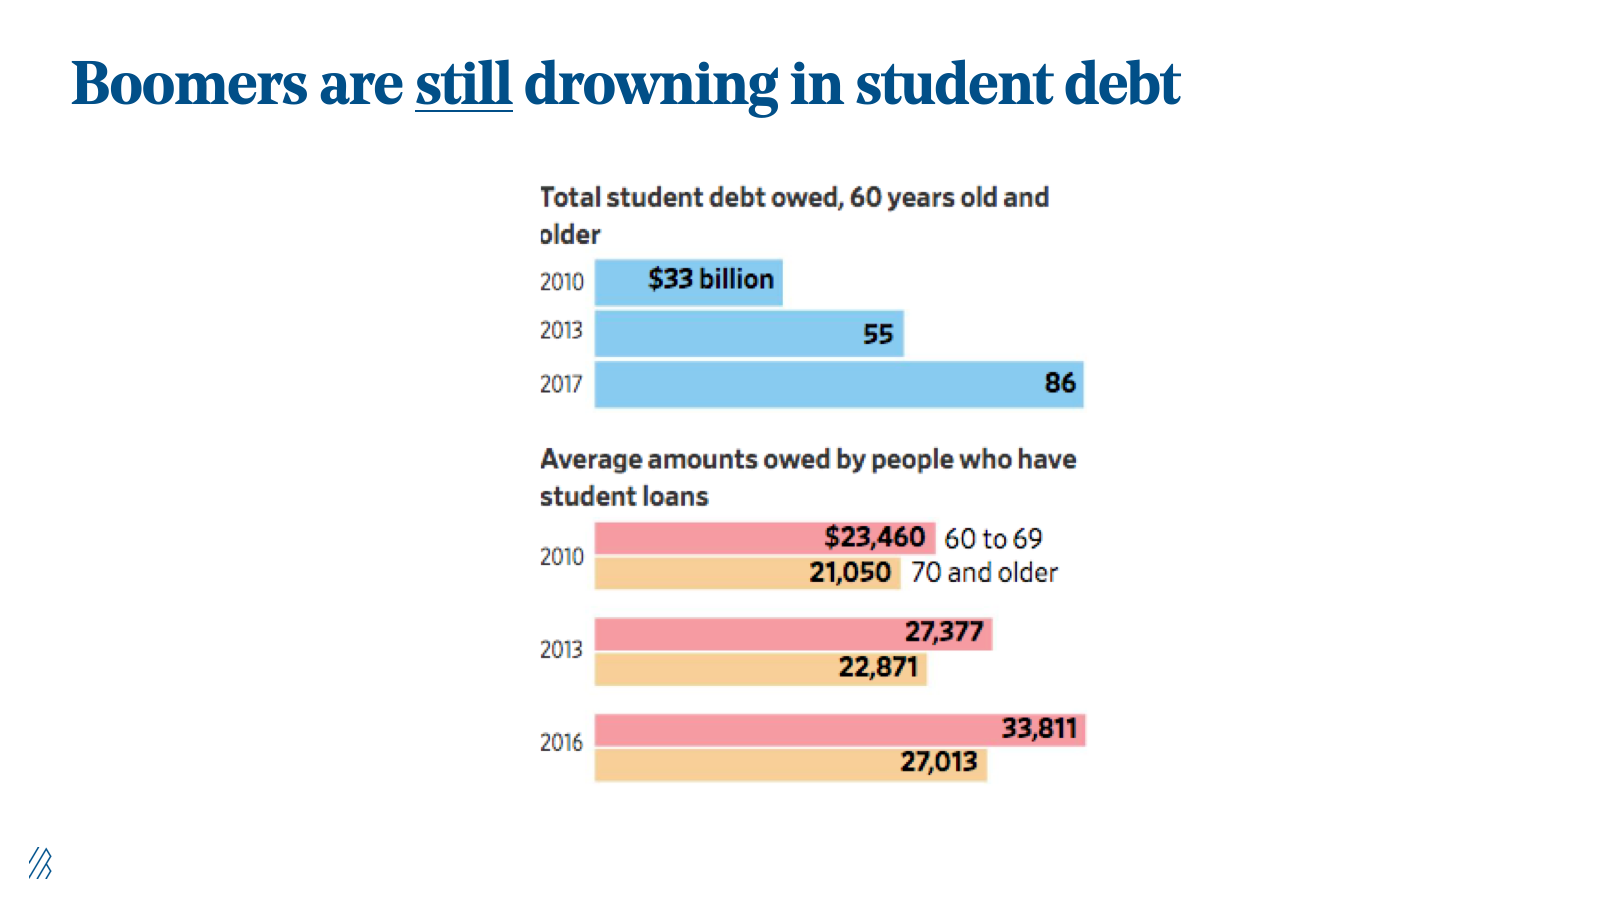 Boomers are still drowning in student debt. 